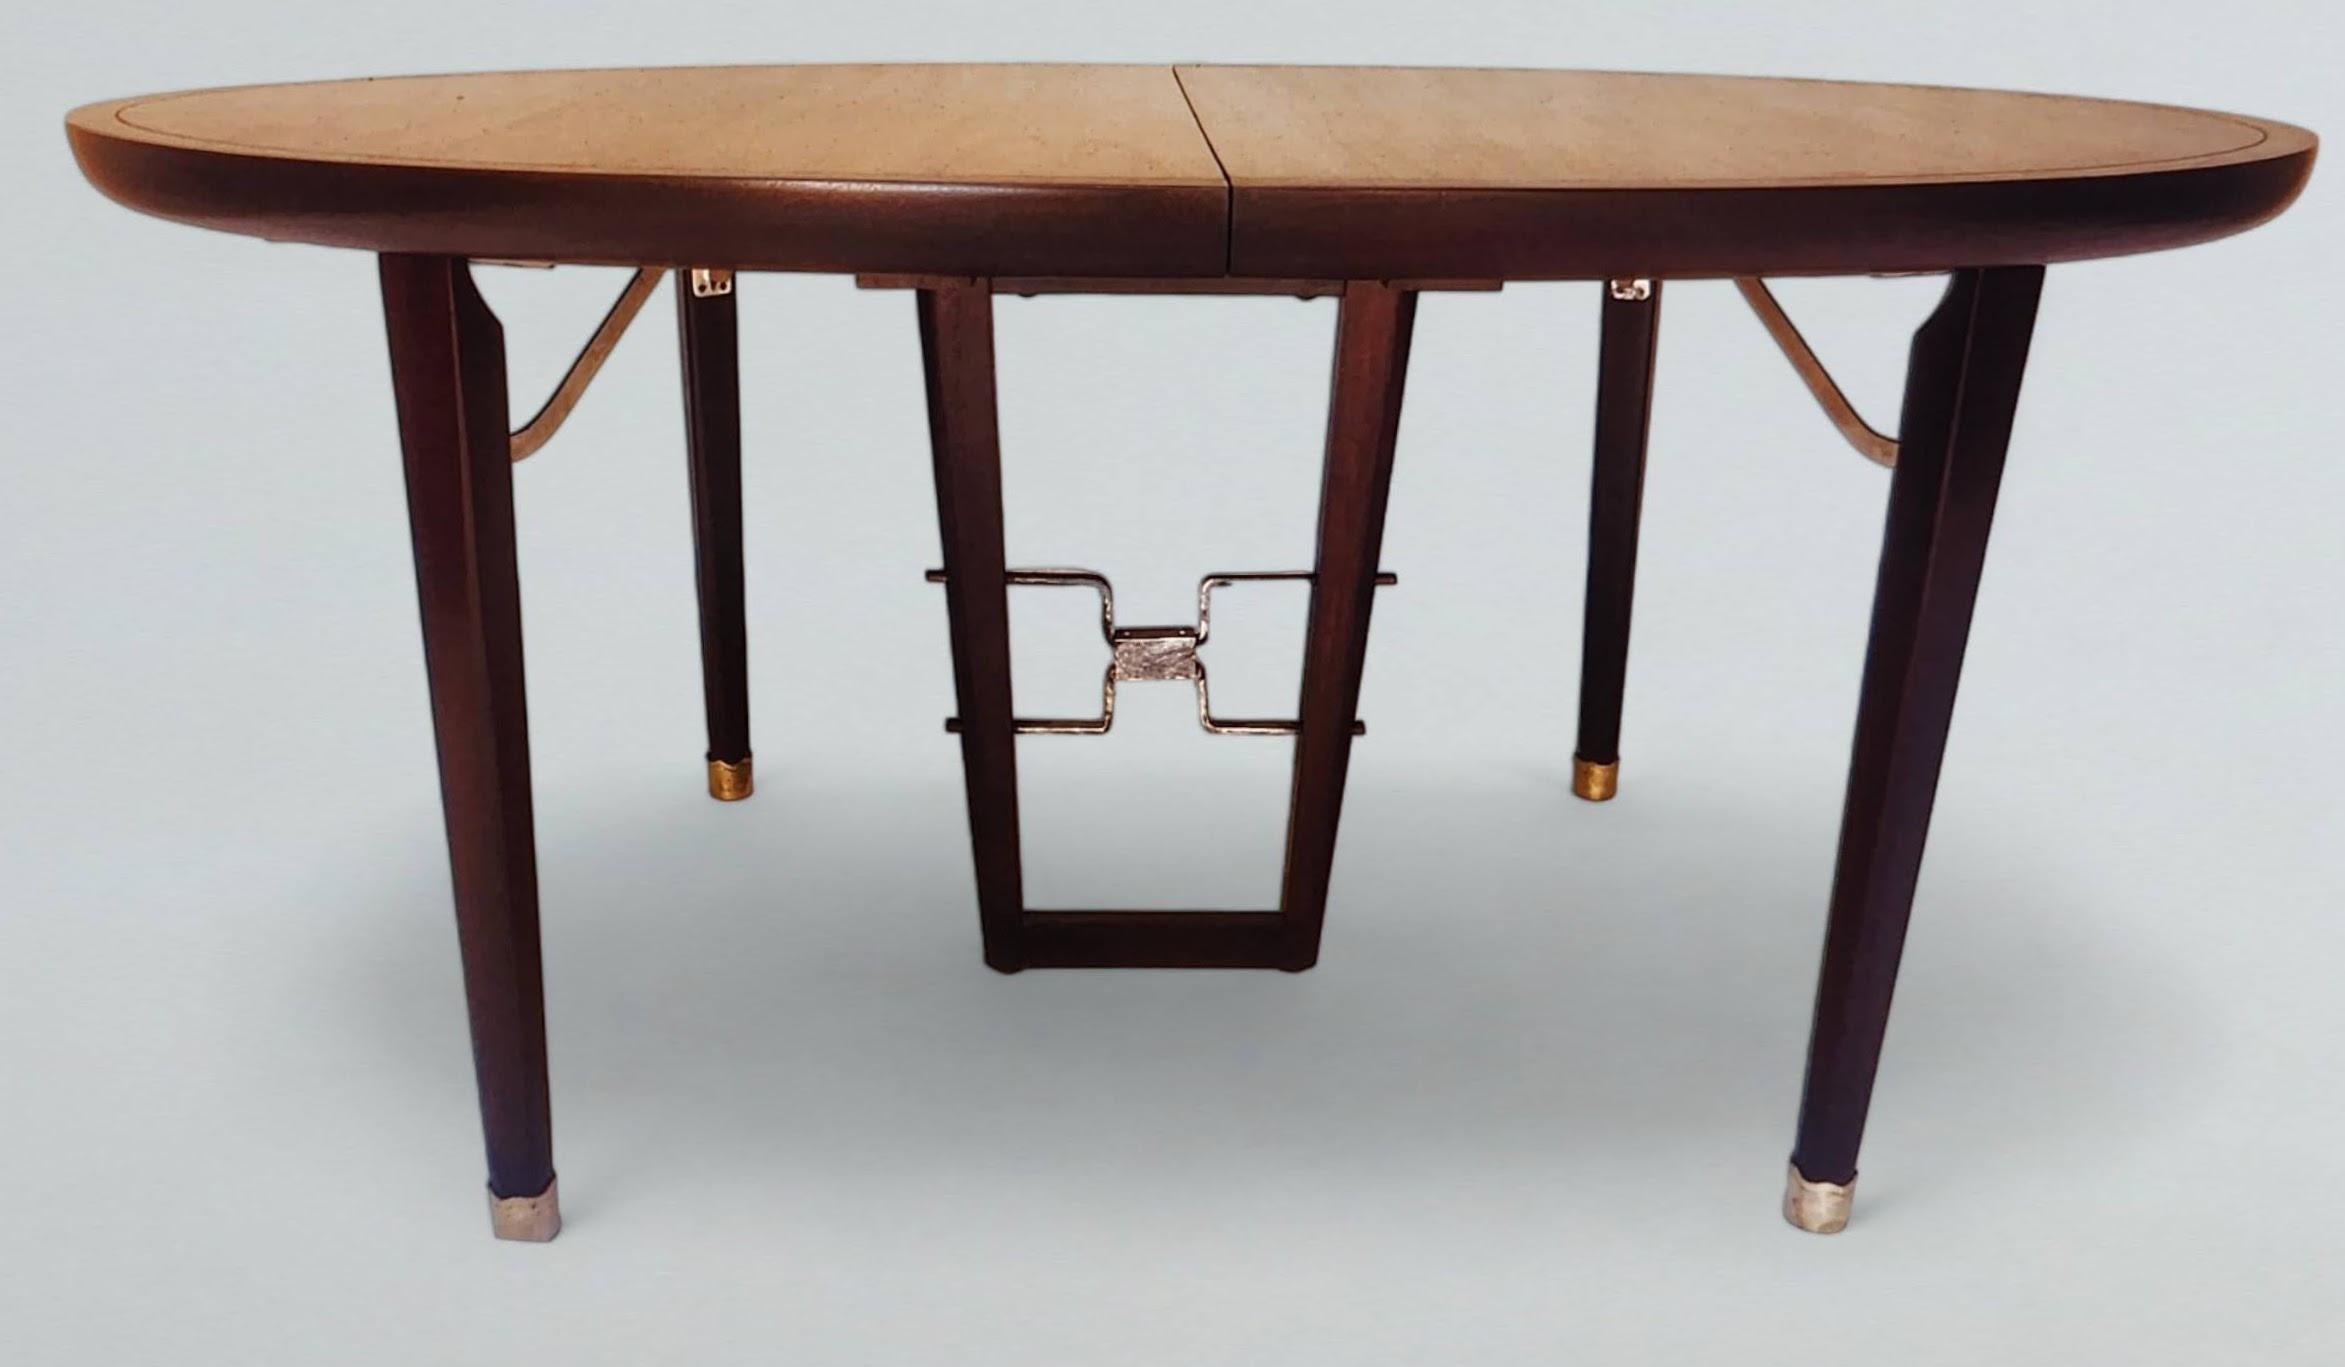 An extraordinary extendable mahogany dining table by Edmund Spence manufactured by Industria Mueblera in Mexico in the 1950s. 
The cast metalwork is gold leafed.
The table has Edmund Spence's Industria Mueblera stamp and additional identification